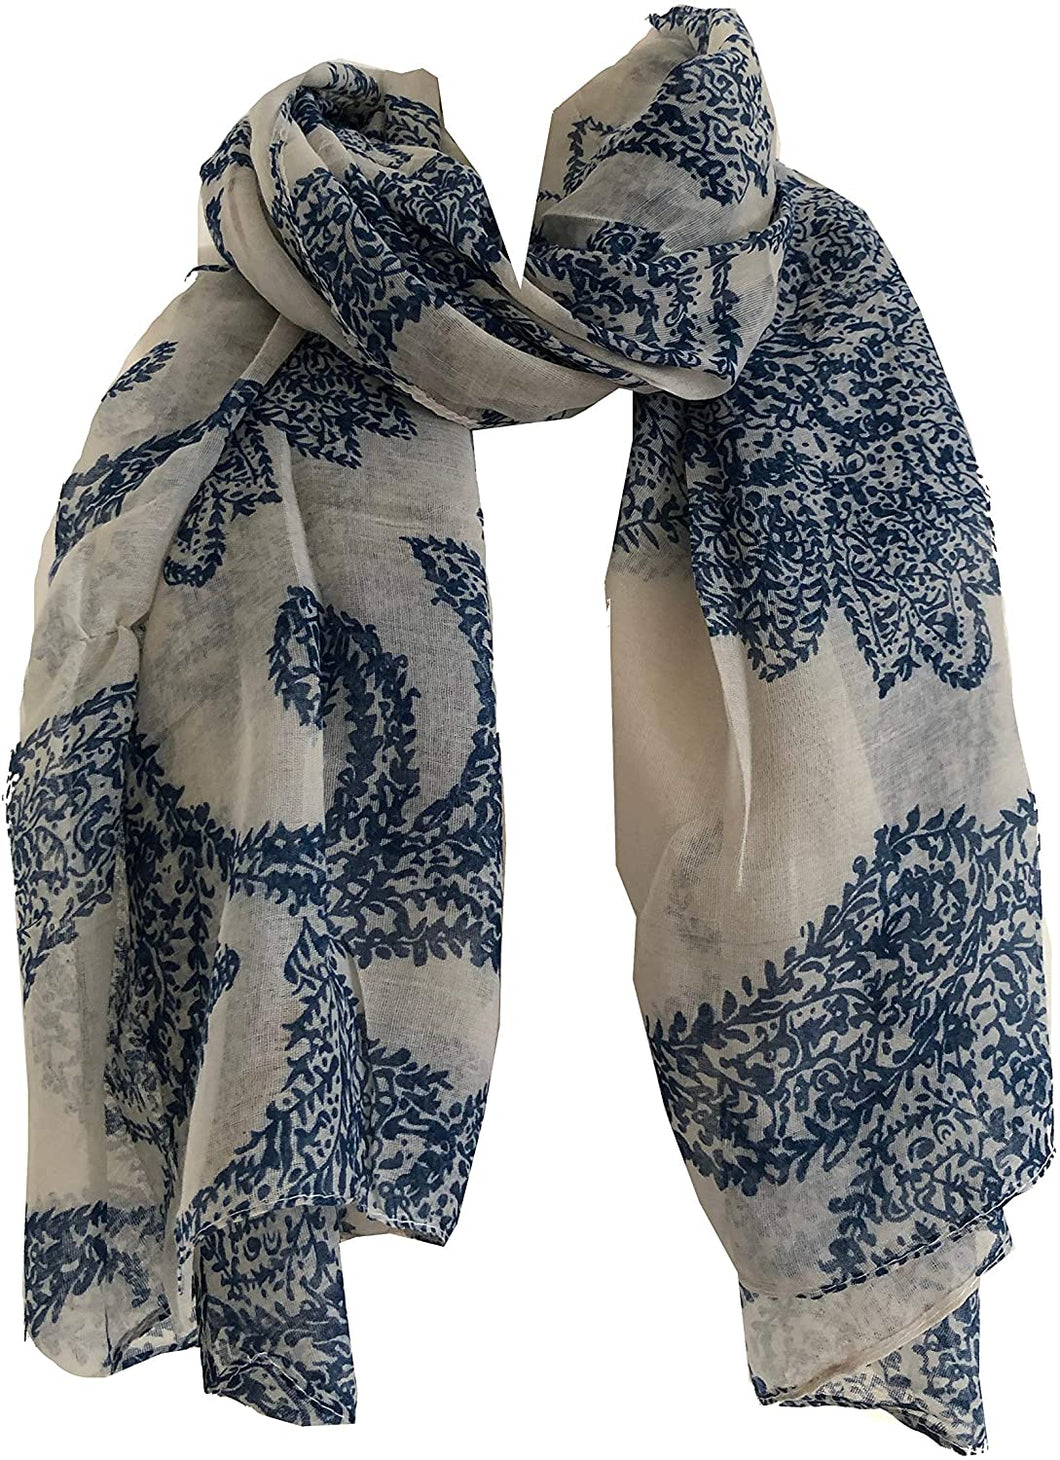 Pamper Yourself Now White with Blue Paisley Pattern Long Scarf, Soft Ladies Fashion London